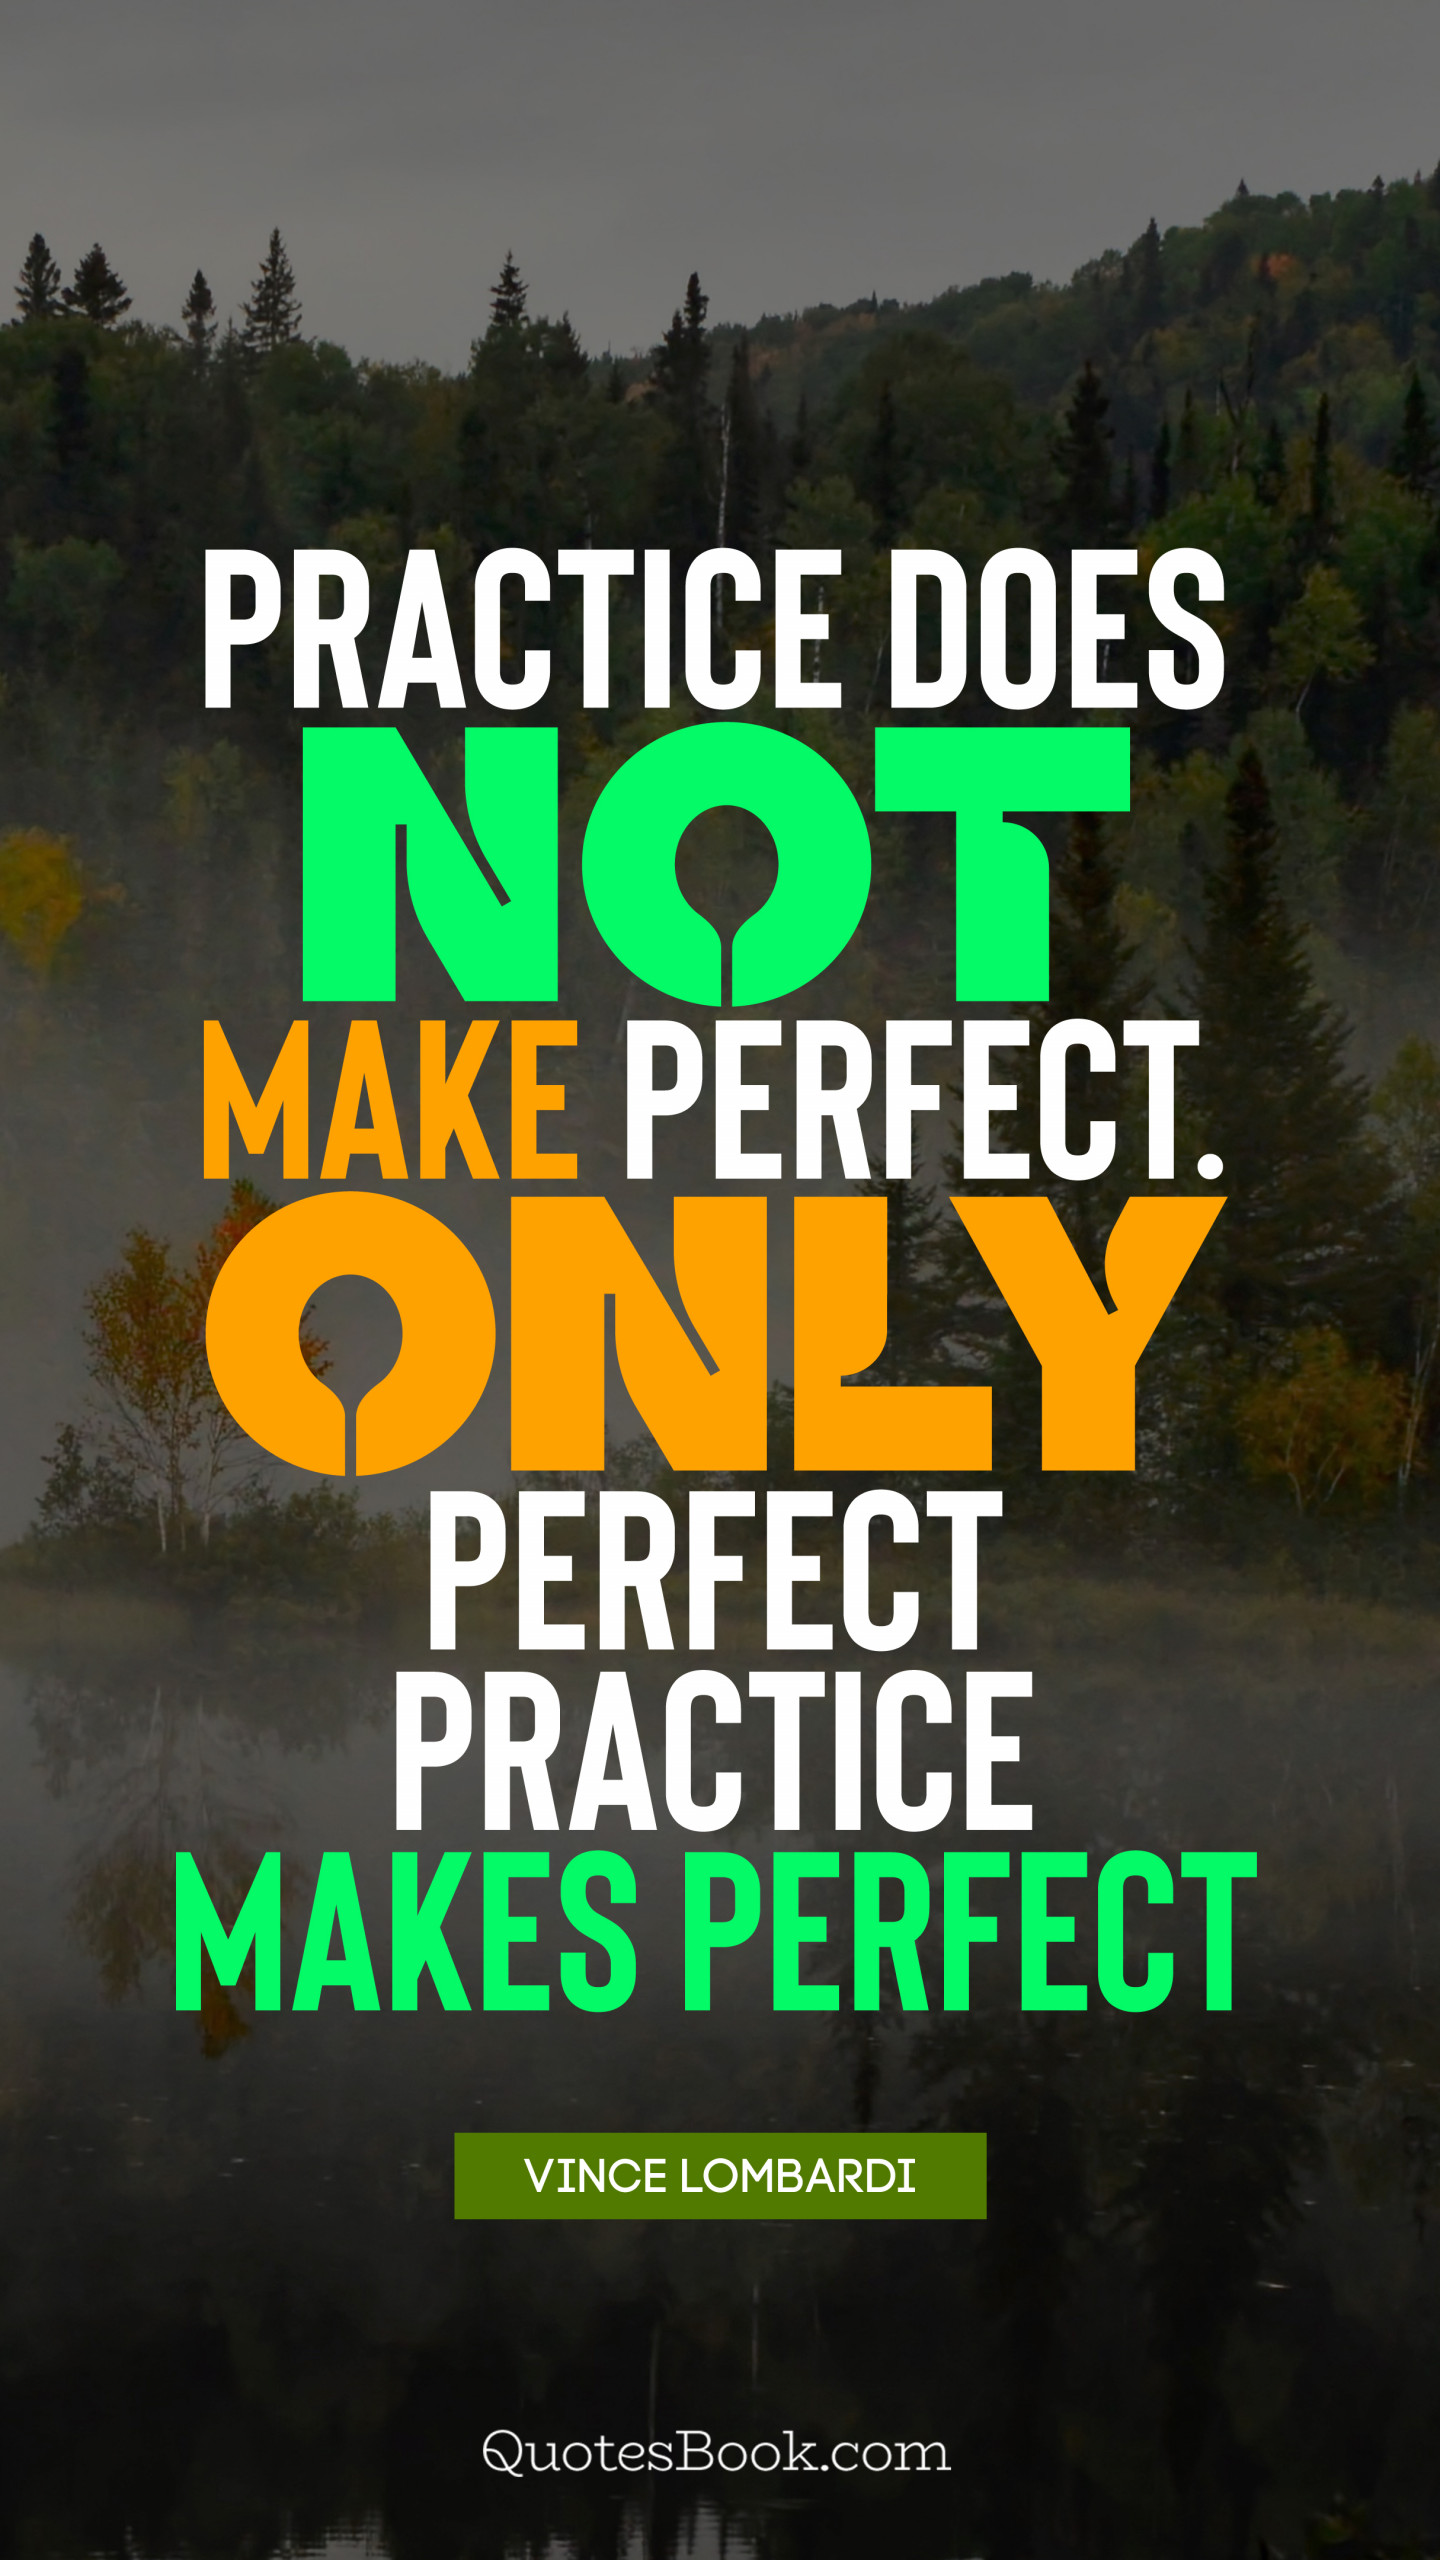 Practice does not make perfect. Only perfect practice